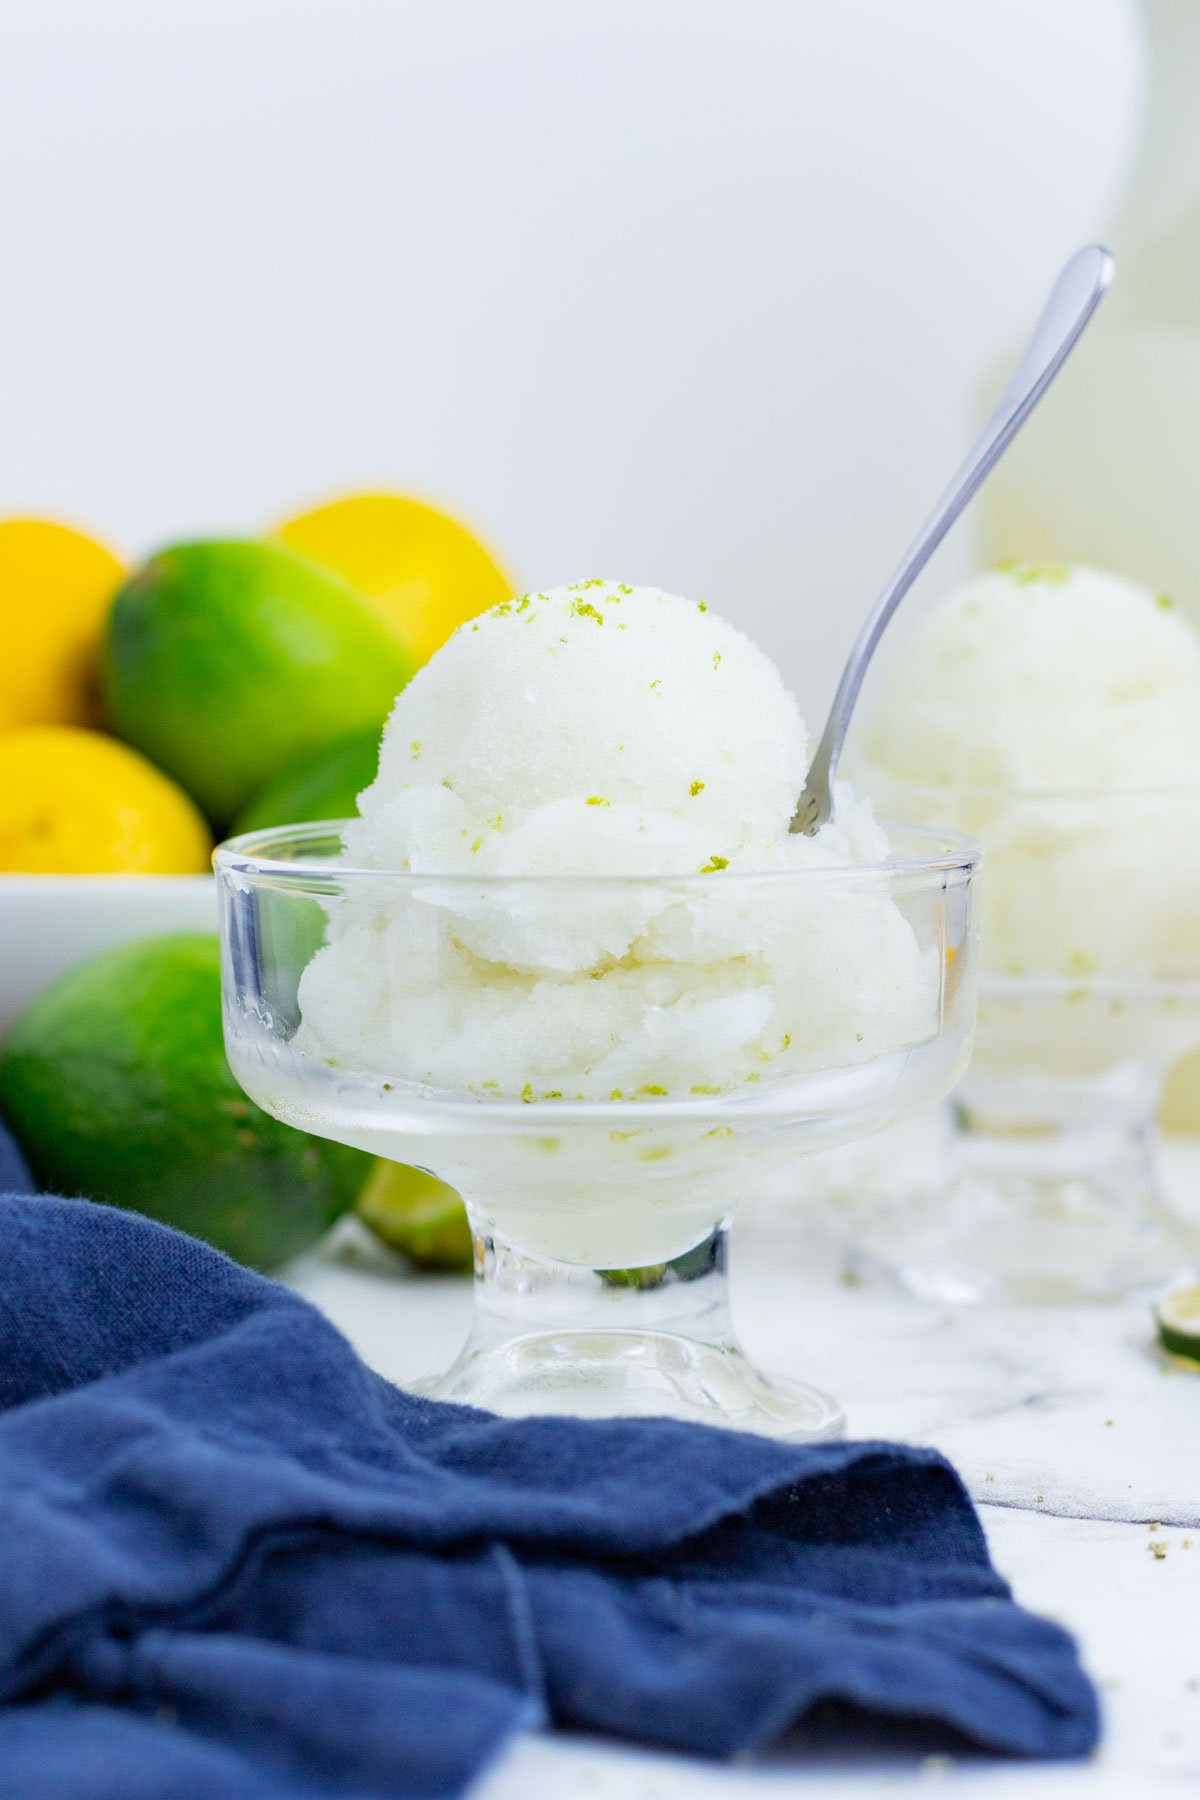 Lime sorbet is cool and refreshing in the summer months.